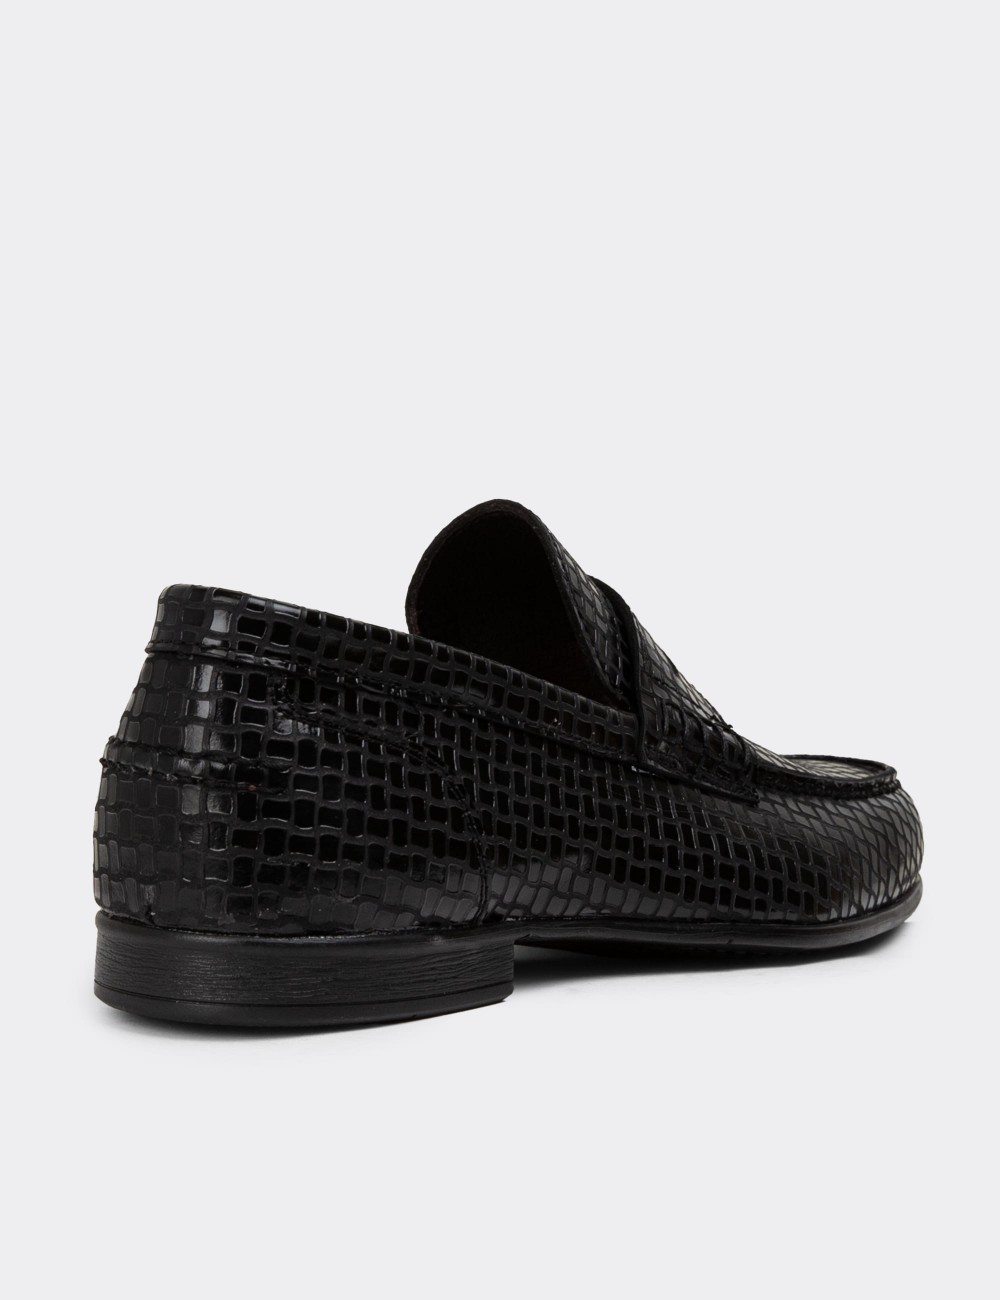 Black Leather Loafers - 01978MSYHC07